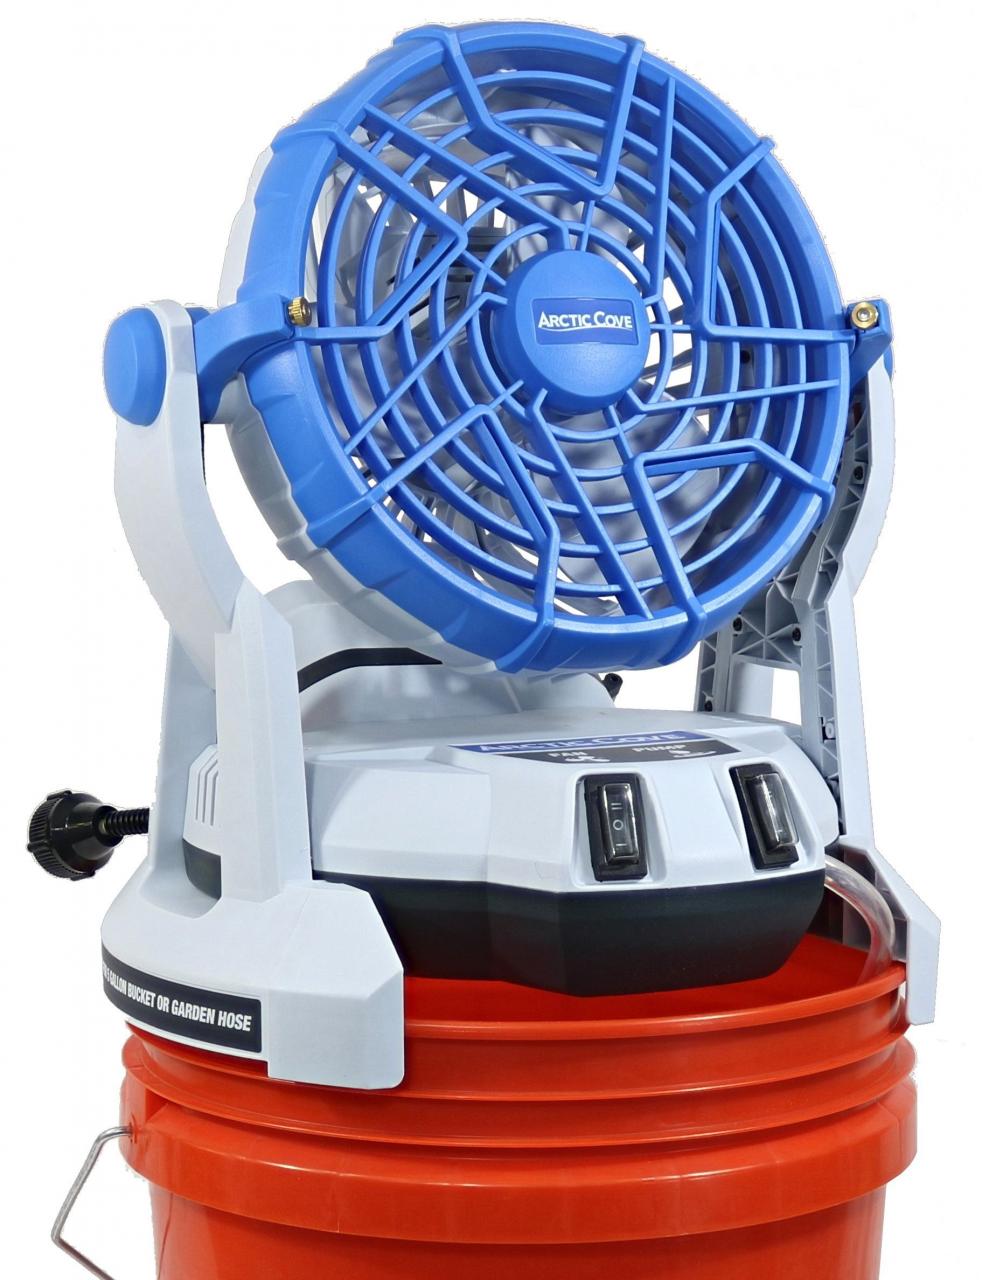 Arctic Cove MBF0181 18V Lithium Ion Powered Cooling Bucket Top Variable  Speed Fan and Water Mister (18V Battery and Charger Included, 5 Gallon  Bucket Not Included) : Amazon.ae: Kitchen